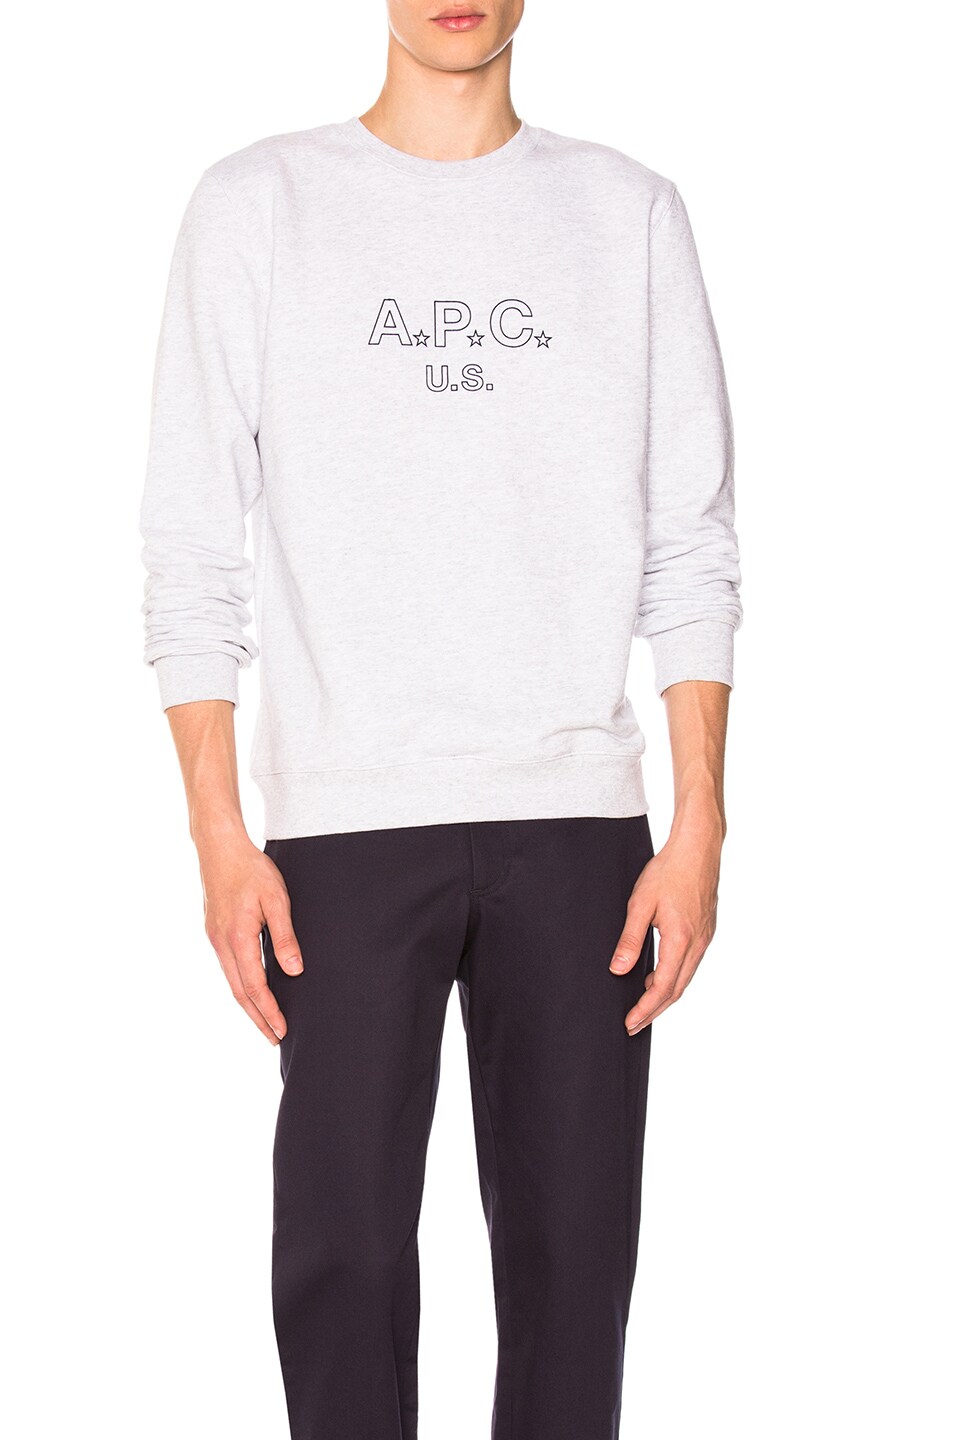 Image 1 of A.P.C. US Star Sweat in Gris Chine